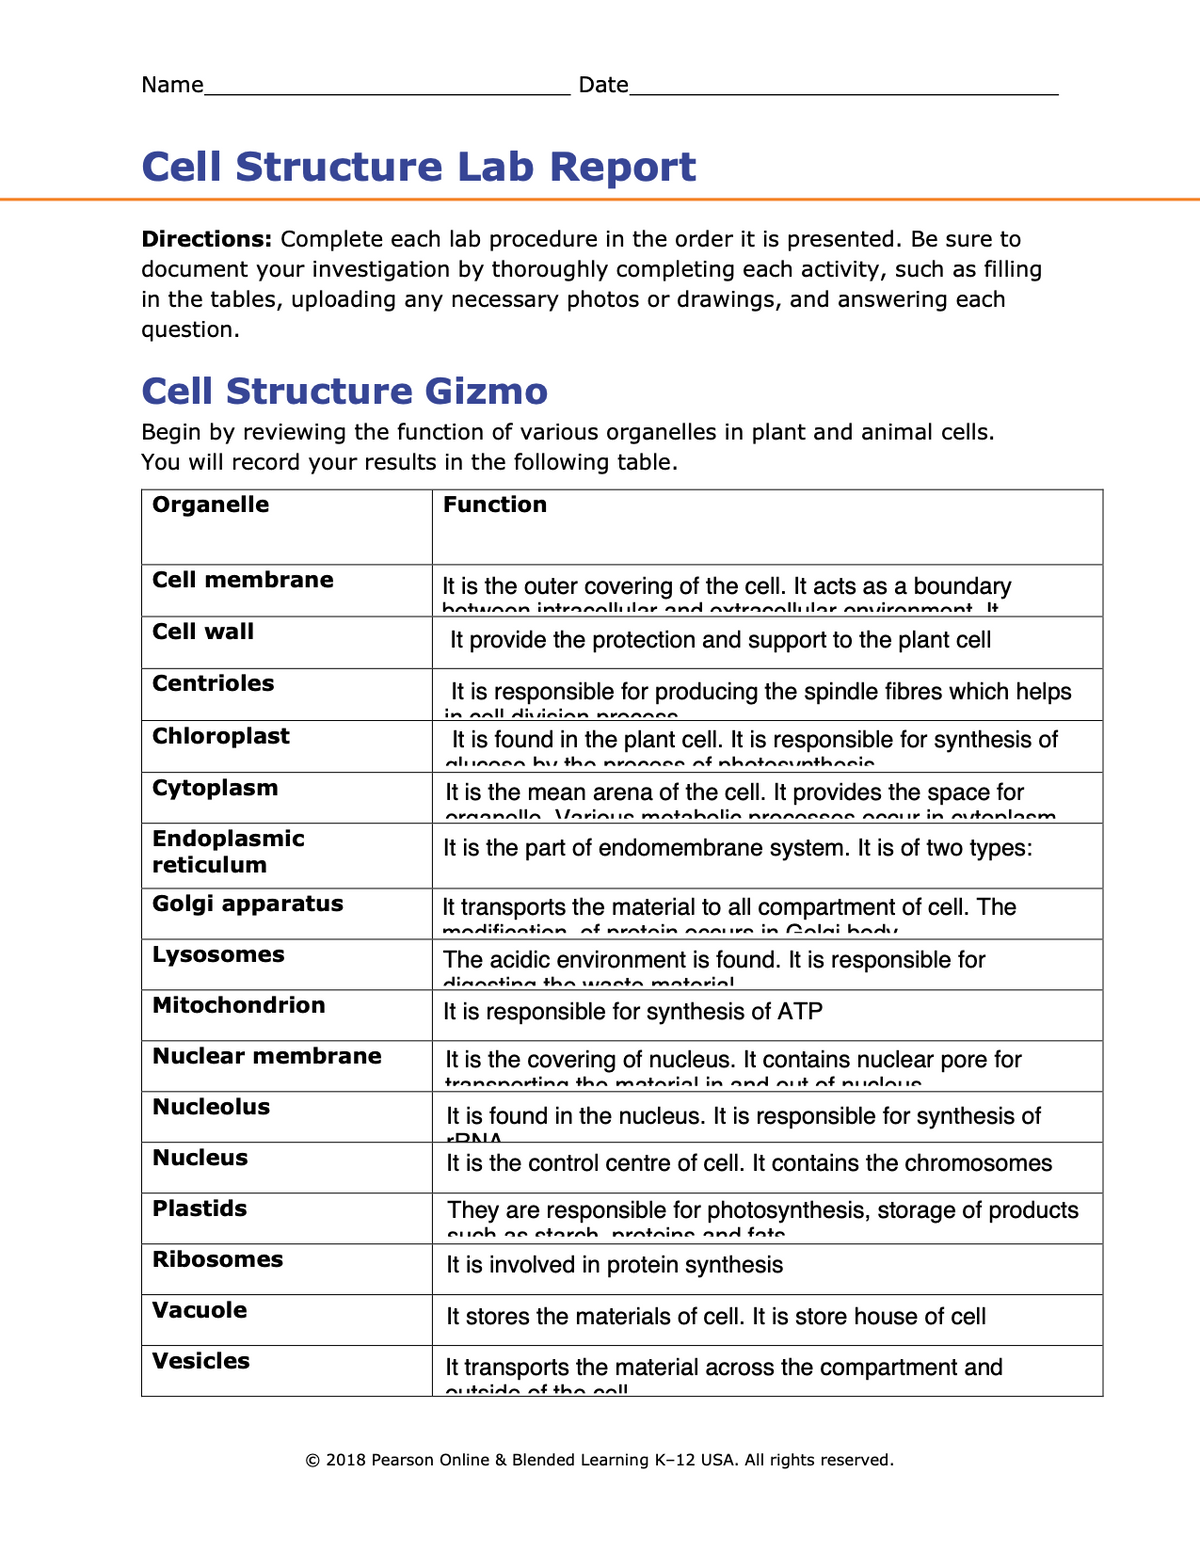 Name
Date
Cell Structure Lab Report
Directions: Complete each lab procedure in the order it is presented. Be sure to
document your investigation by thoroughly completing each activity, such as filling
in the tables, uploading any necessary photos or drawings, and answering each
question.
Cell Structure Gizmo
Begin by reviewing the function of various organelles in plant and animal cells.
You will record your results in the following table.
Organelle
Function
Cell membrane
It is the outer covering of the cell. It acts as a boundary
hotwoon intracollulr and ovtroollular onvironmont It
Cell wall
It provide the protection and support to the plant cell
Centrioles
It is responsible for producing the spindle fibres which helps
in coll divicion nrone
Chloroplast
It is found in the plant cell. It is responsible for synthesis of
alunnse hu the nrocoss of nhotocunthosic
Cytoplasm
It is the mean arena of the cell. It provides the space for
organollo Vorinue motaholic pronncsns onCur in outonleem
Endoplasmic
reticulum
It is the part of endomembrane system. It is of two types:
Golgi apparatus
It transports the material to all compartment of cell. The
modifinntion of nrotoin onoure in Golai ho
Lysosomes
The acidic environment is found. It is responsible for
dinstina the wostn motorial
Mitochondrion
It is responsible for synthesis of ATP
Nuclear membrane
It is the covering of nucleus. It contains nuclear pore for
tronenorting the mnterial in and out of nuolous
Nucleolus
It is found in the nucleus. It is responsible for synthesis of
rRNA
Nucleus
It is the control centre of cell. It contains the chromosomes
Plastids
They are responsible for photosynthesis, storage of products
Cuch oo storch nrotoins and fote
Ribosomes
It is involved in protein synthesis
Vacuole
It stores the materials of cell. It is store house of cell
Vesicles
It transports the material across the compartment and
Outeido of the ooll
© 2018 Pearson Online & Blended Learning K-12 USA. All rights reserved.
